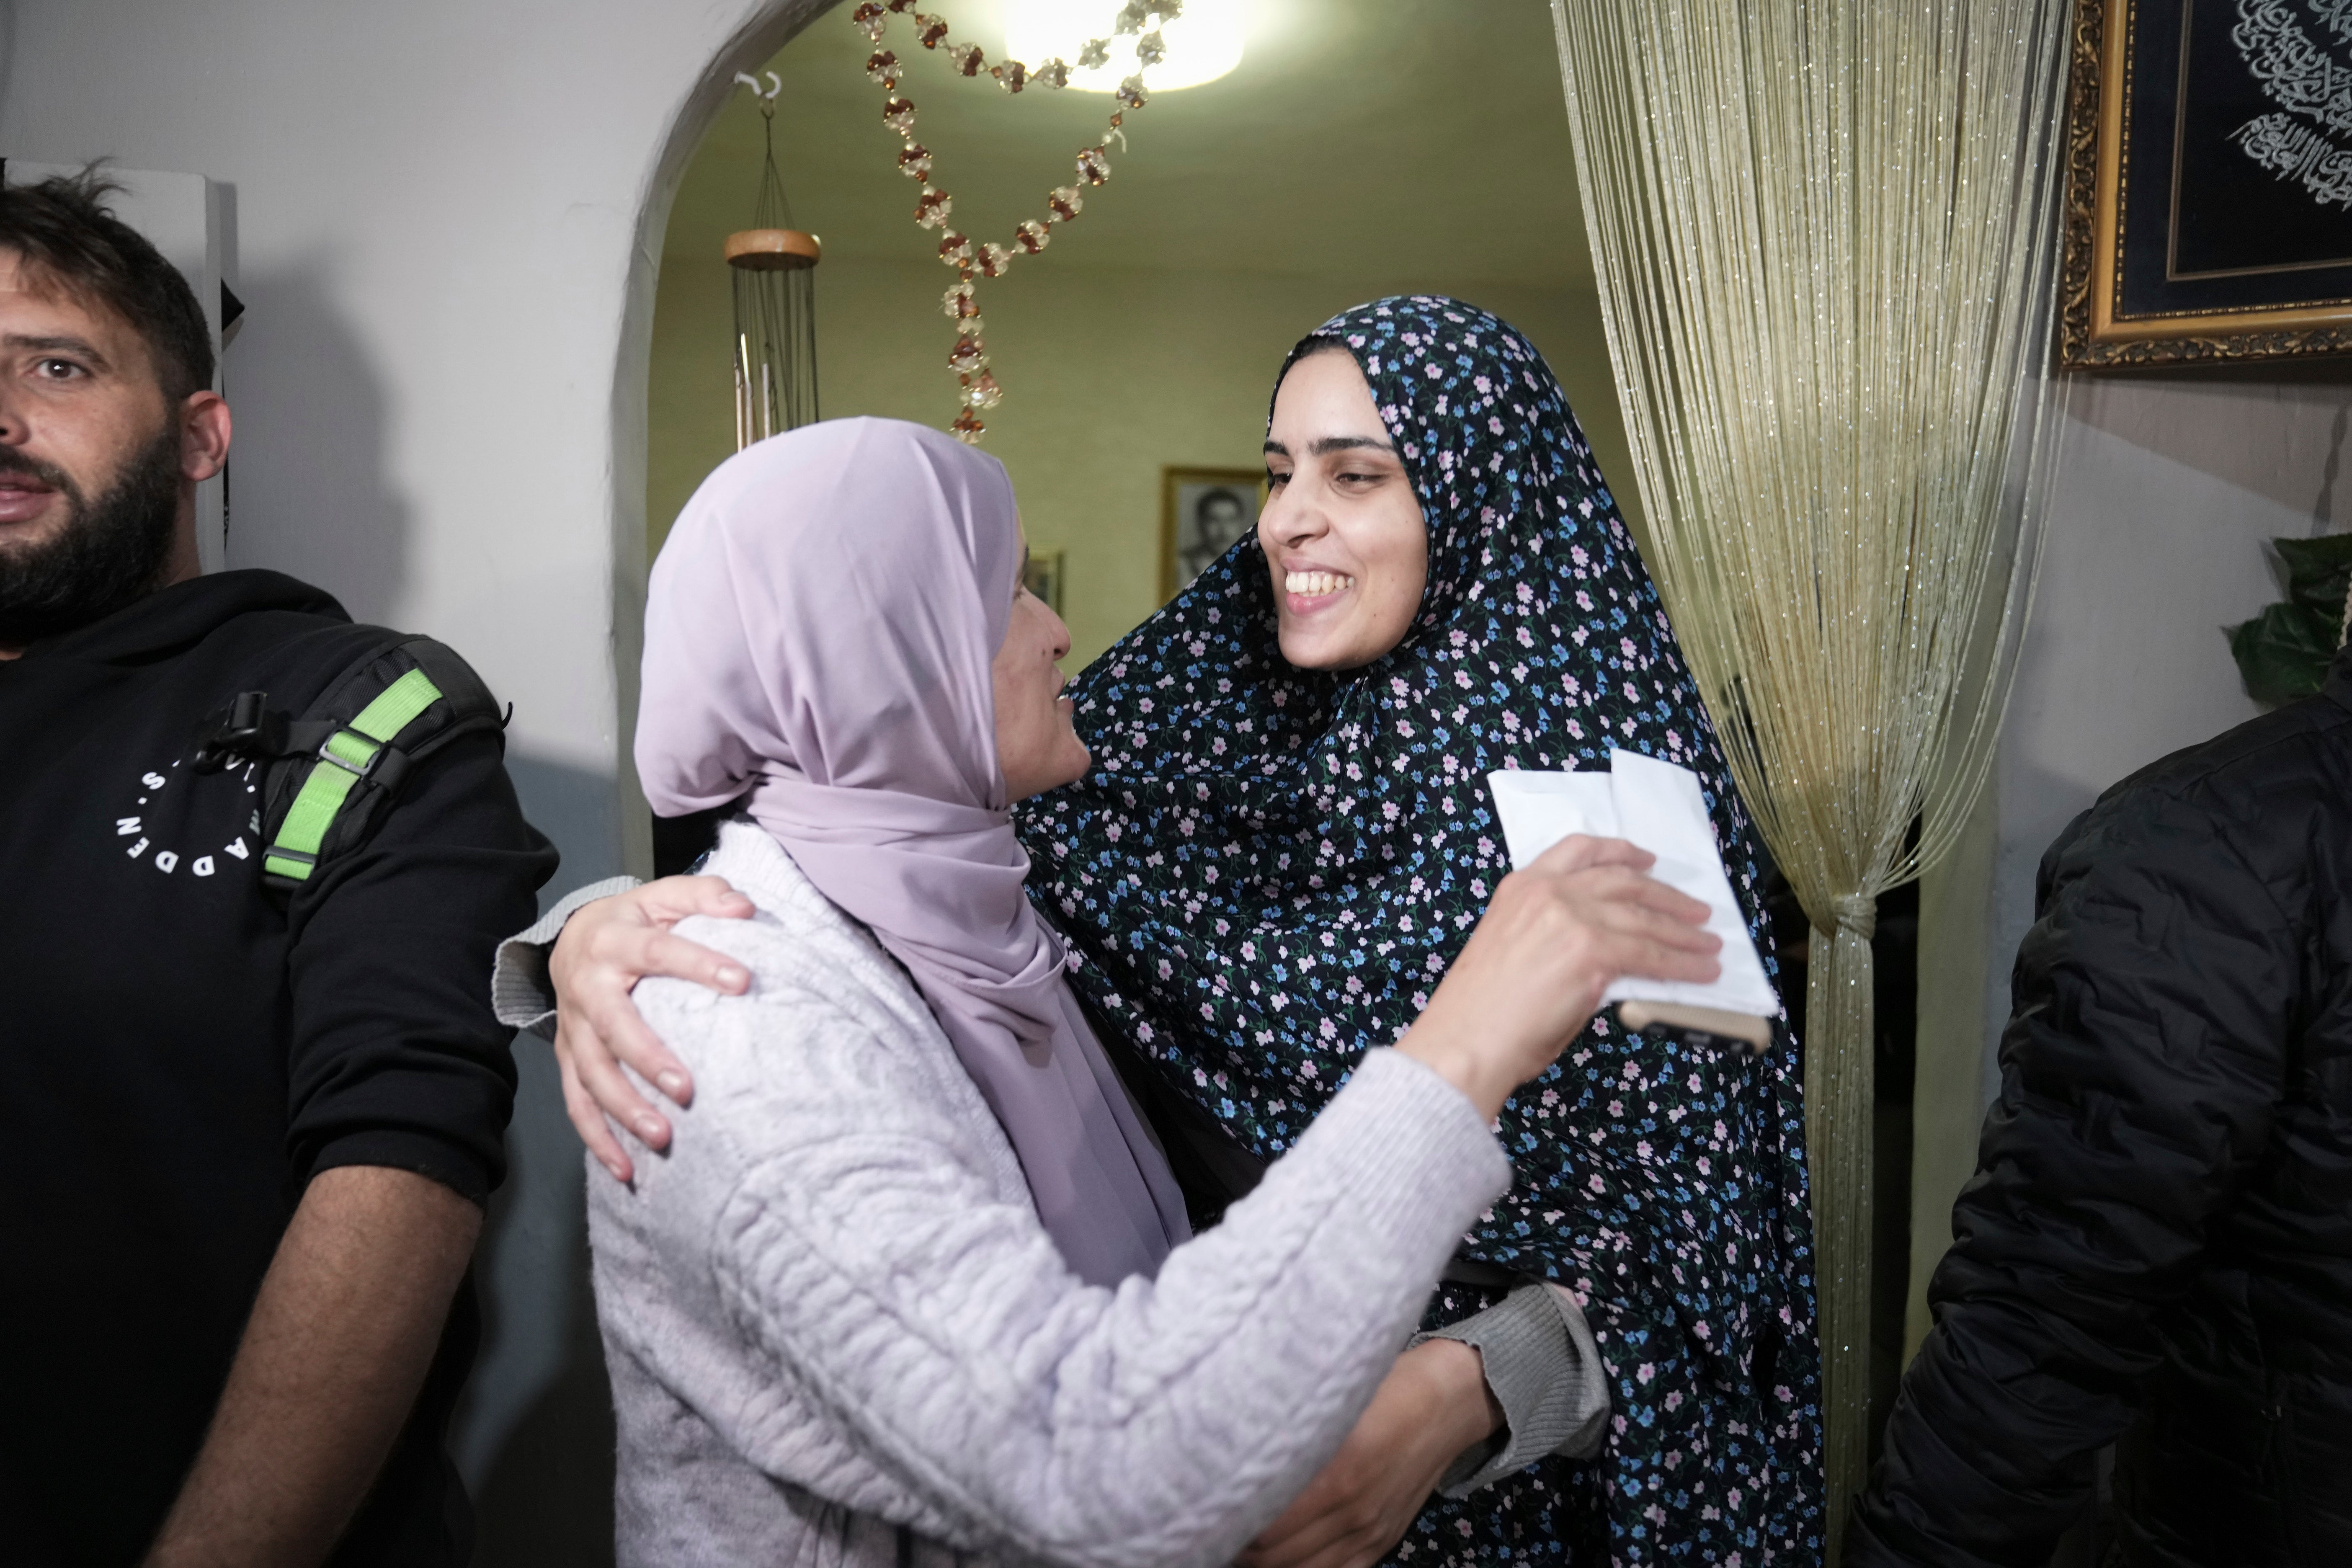 Marah Bakir, right, a former Palestinian prisoner who was released by the Israeli authorities, at her family home in east Jerusalem